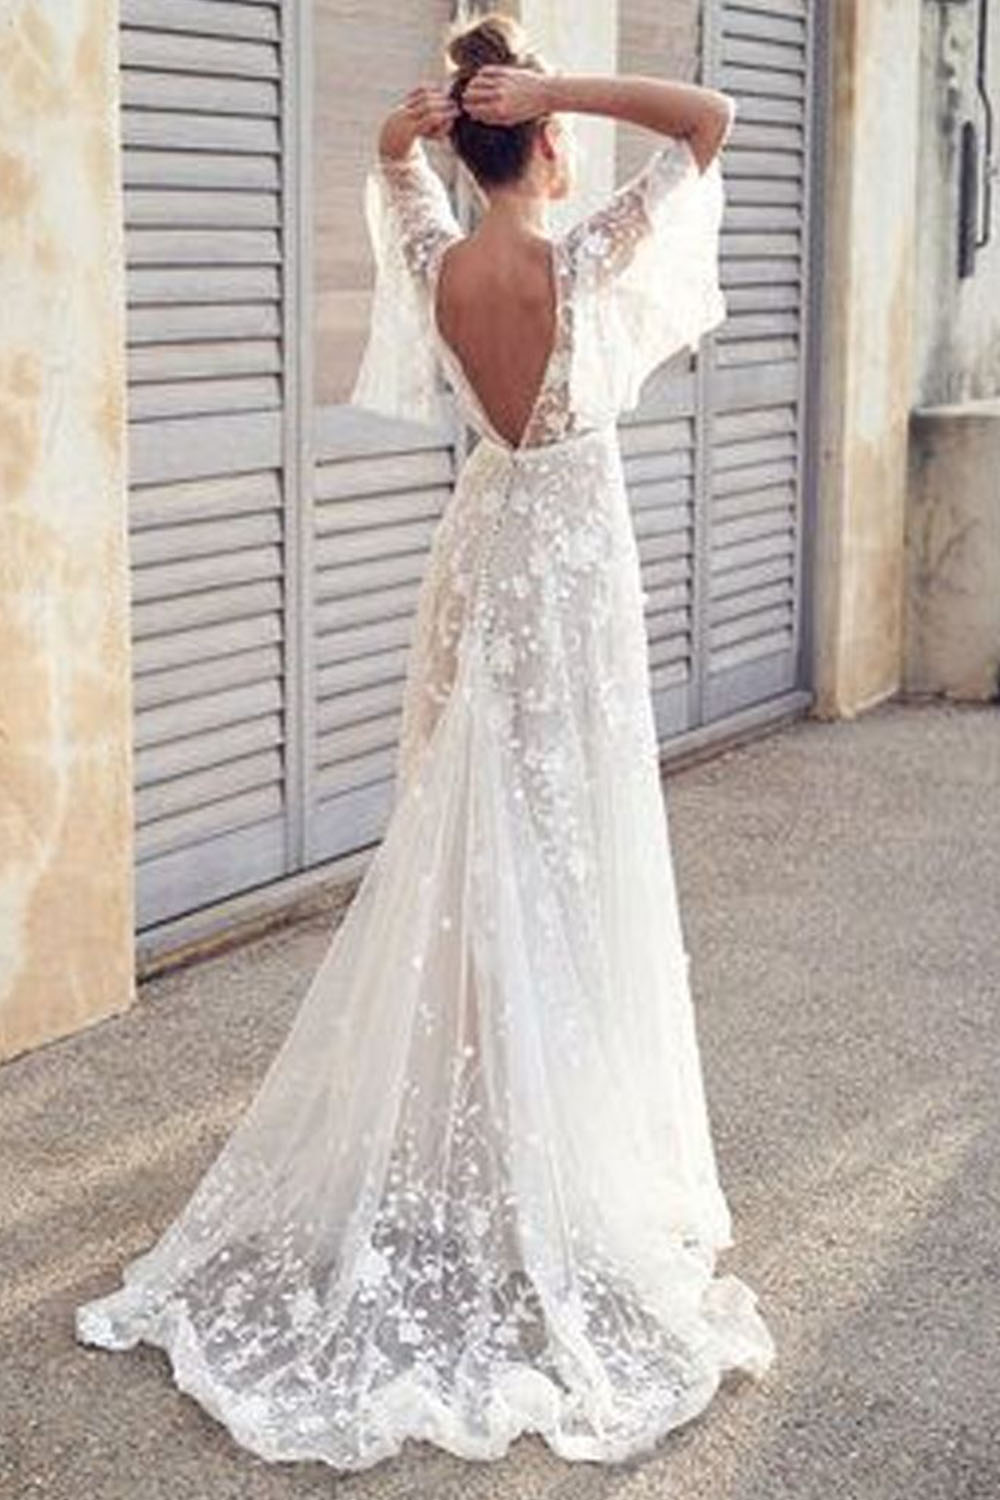 Prom White Embroidery Lace Floral V Neck Ruffle Sleeve Backless Maxi Dress